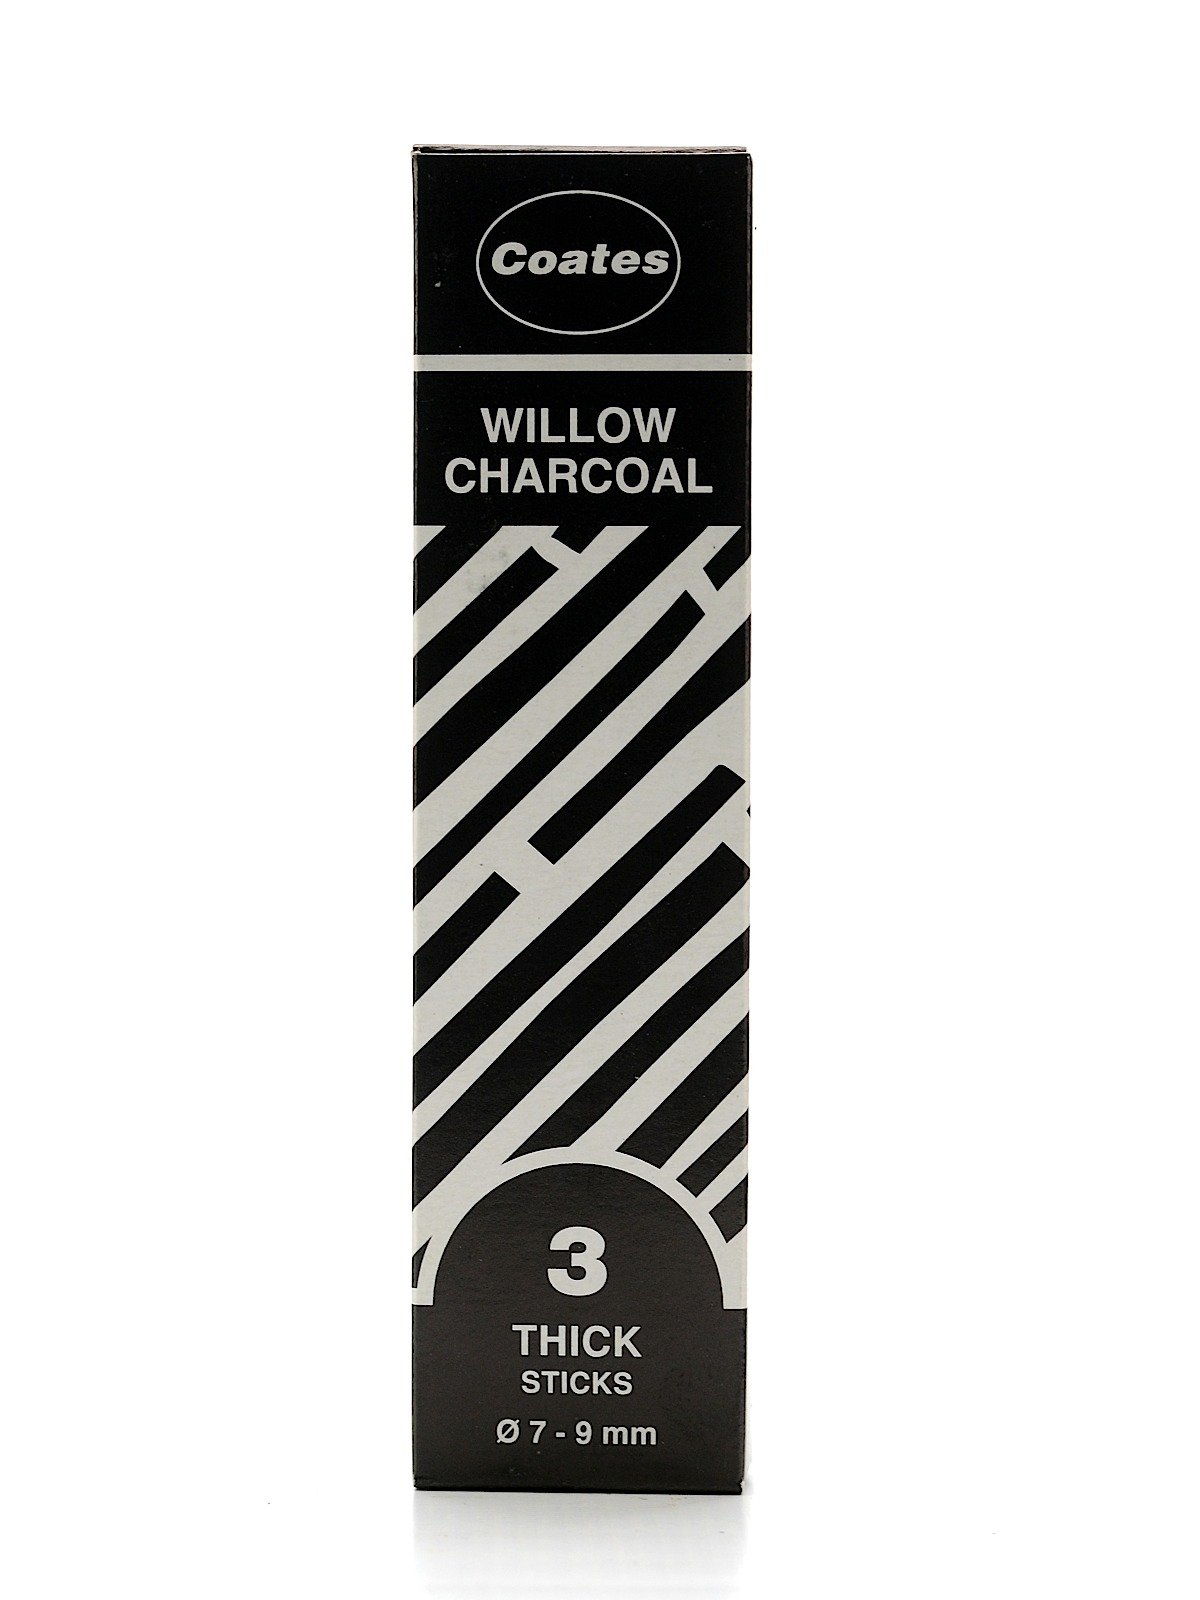 Coates Willow Charcoal, Assorted 30 Sticks 3-12mm 